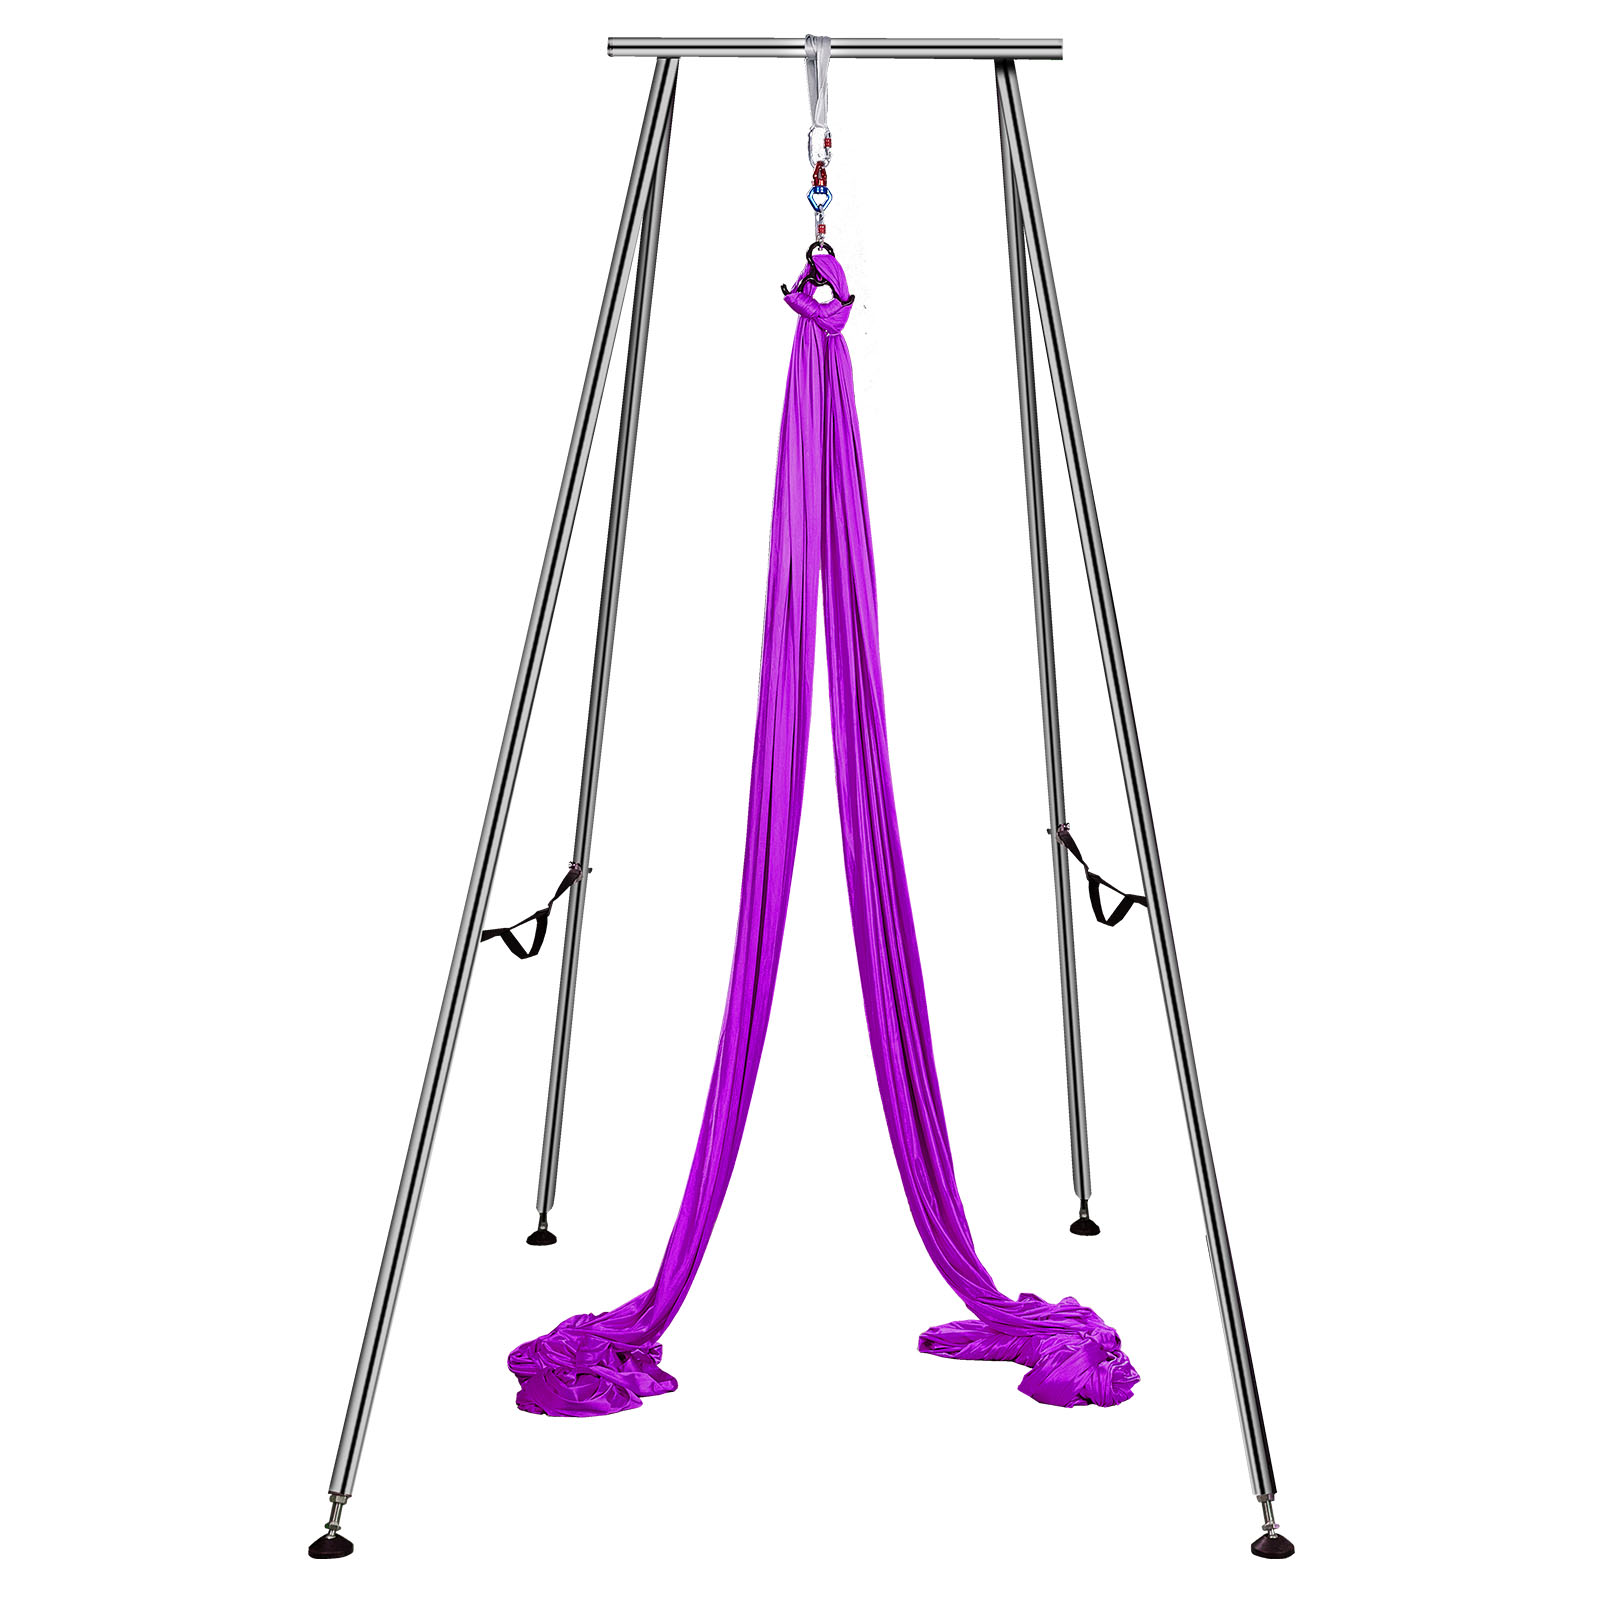 Aerial Yoga Frame,Portable,Indoor Outdoor Exercise